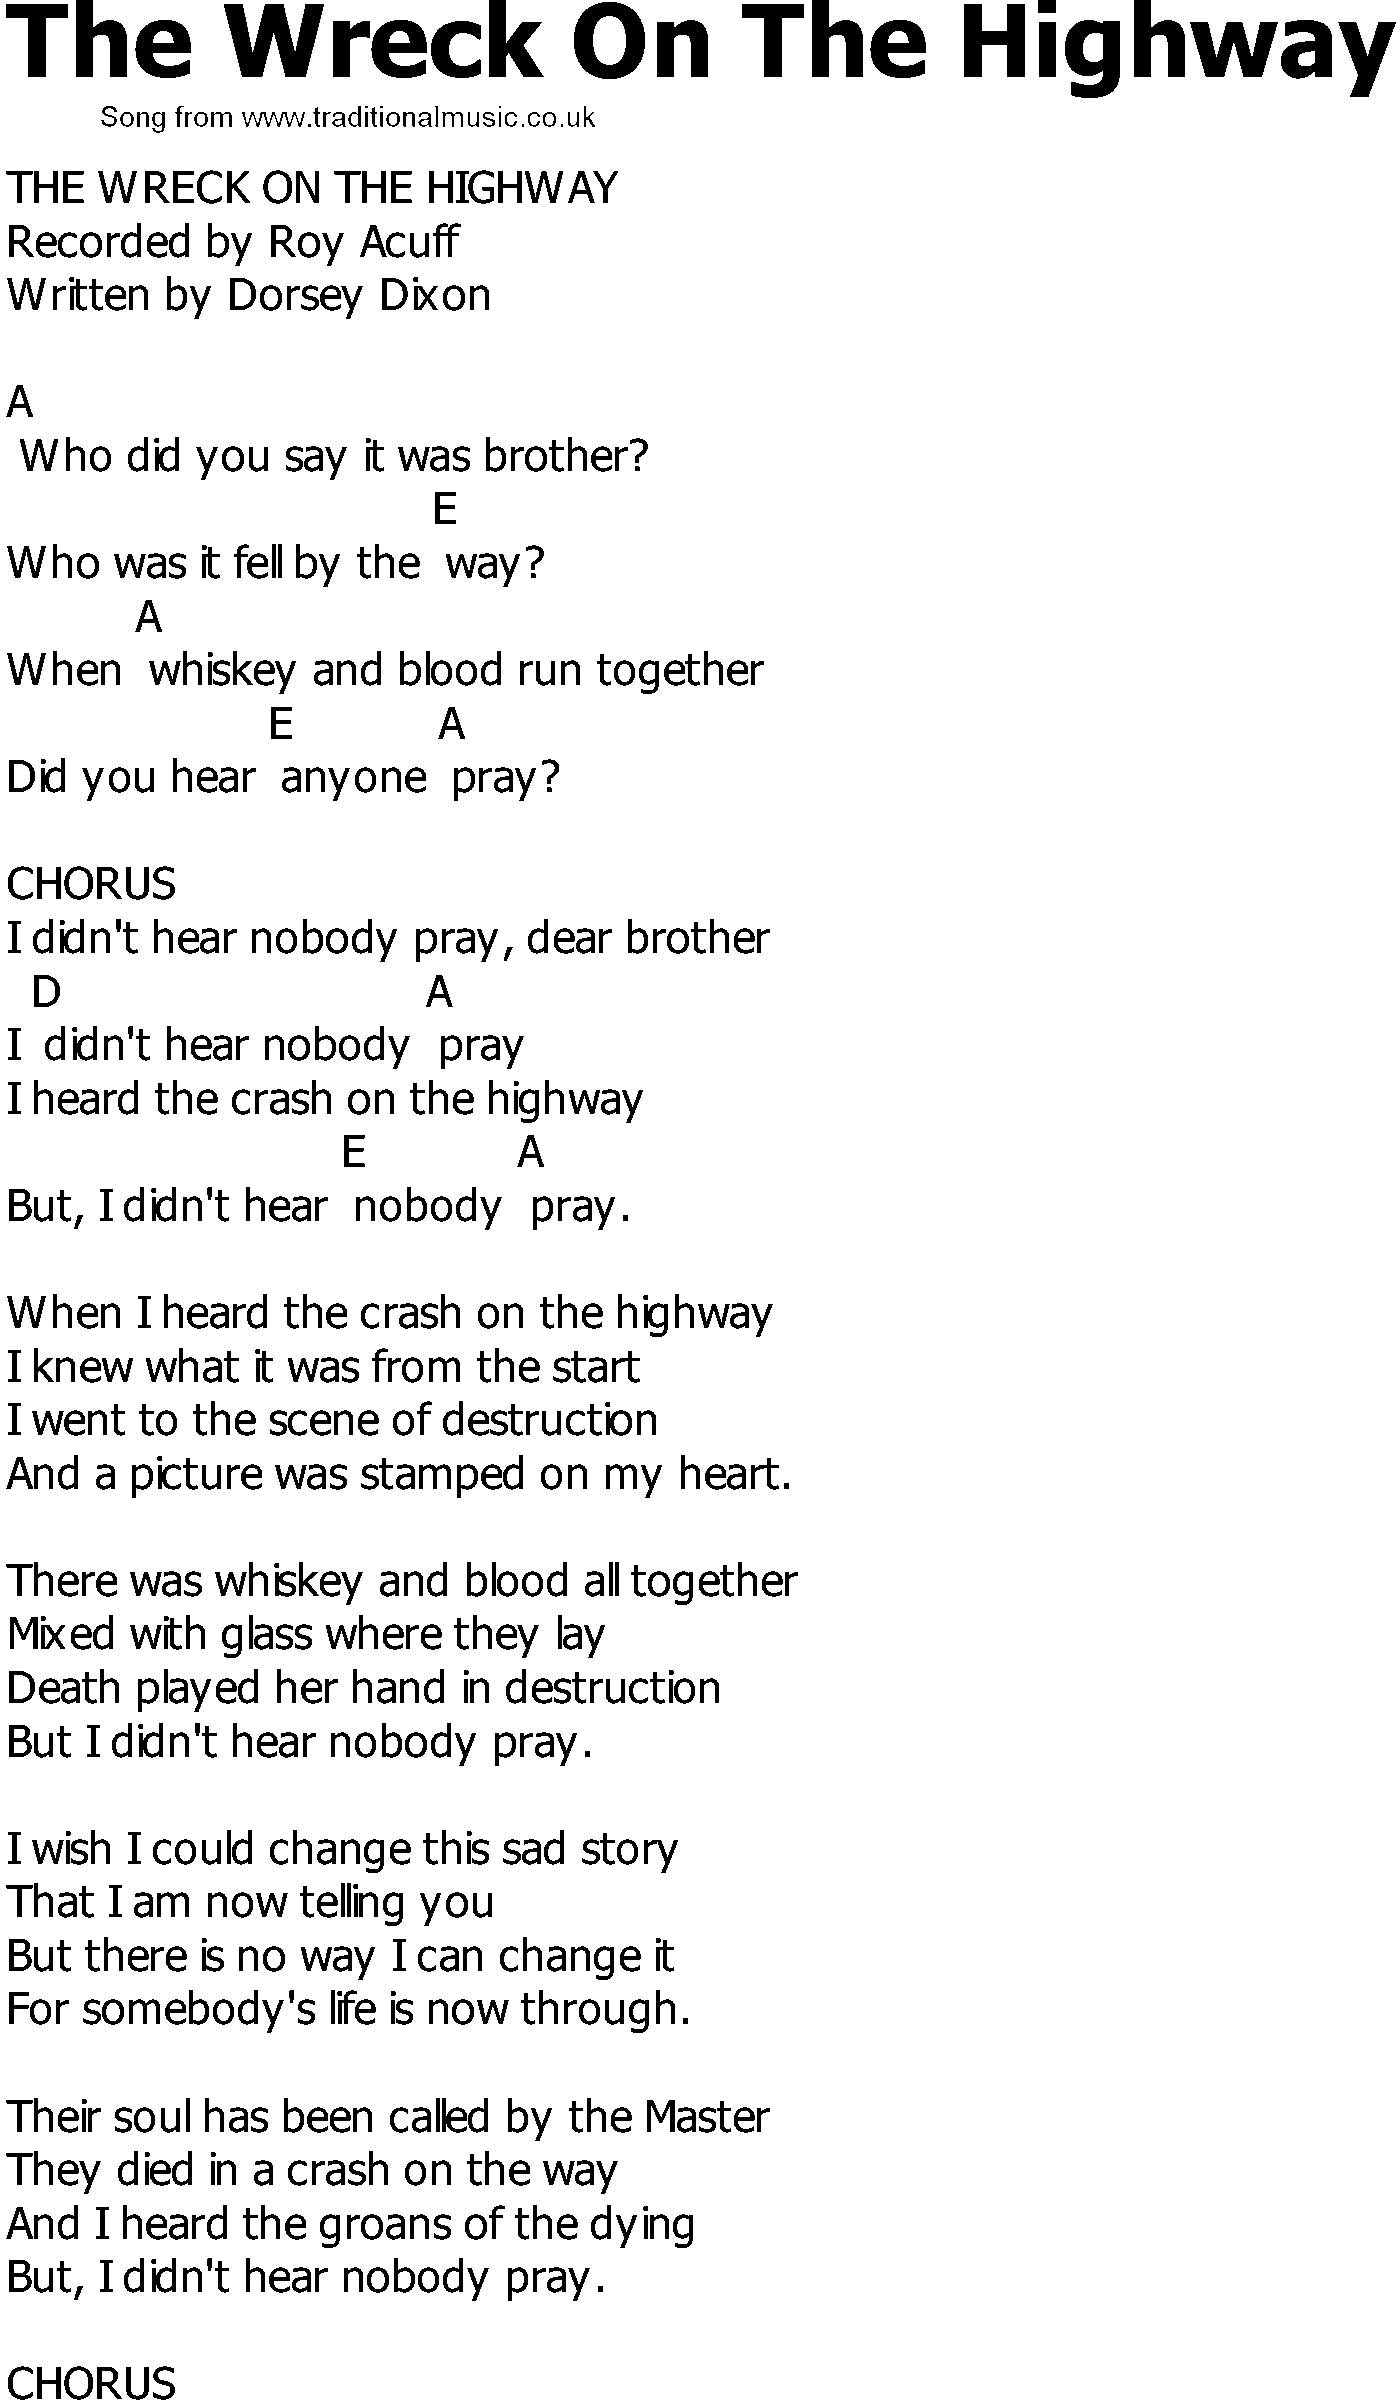 Old Country song lyrics with chords - The Wreck On The Highway